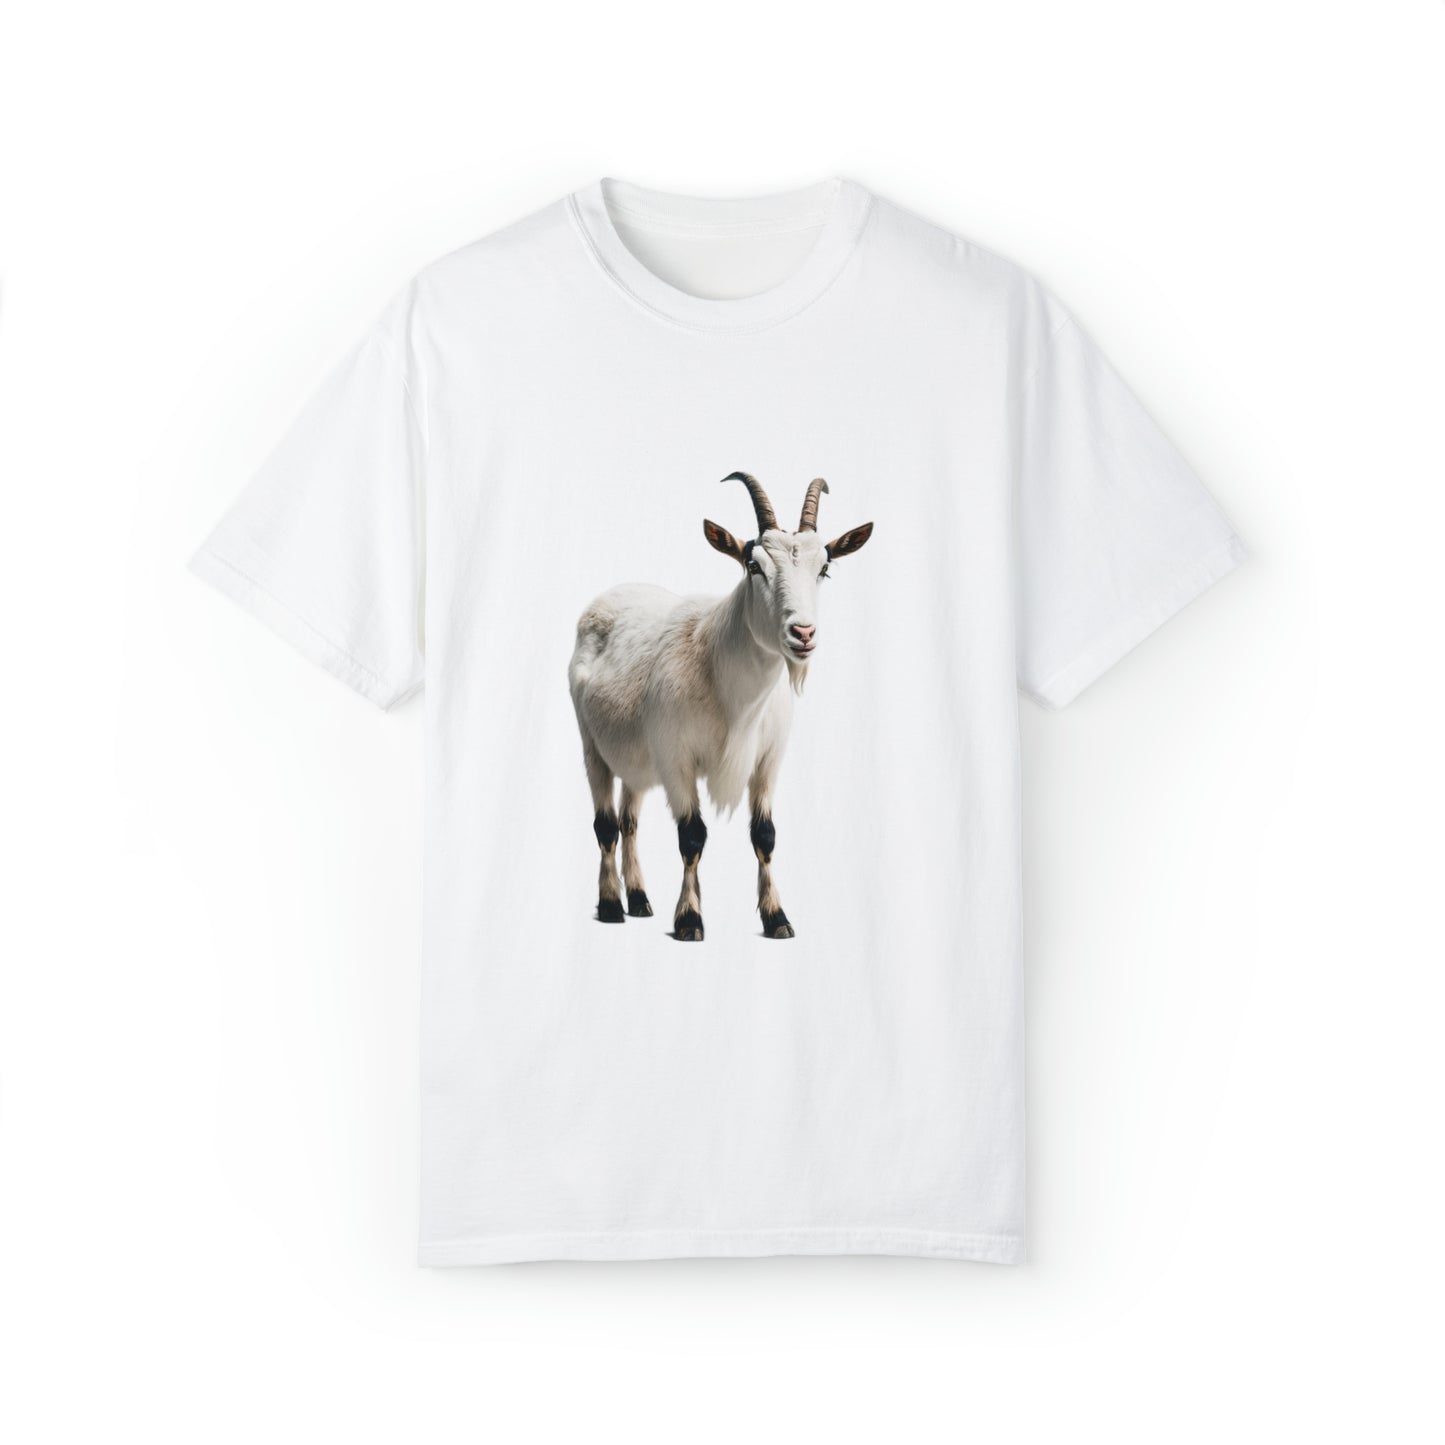 Greatest Of All Time (GOAT) tshirt